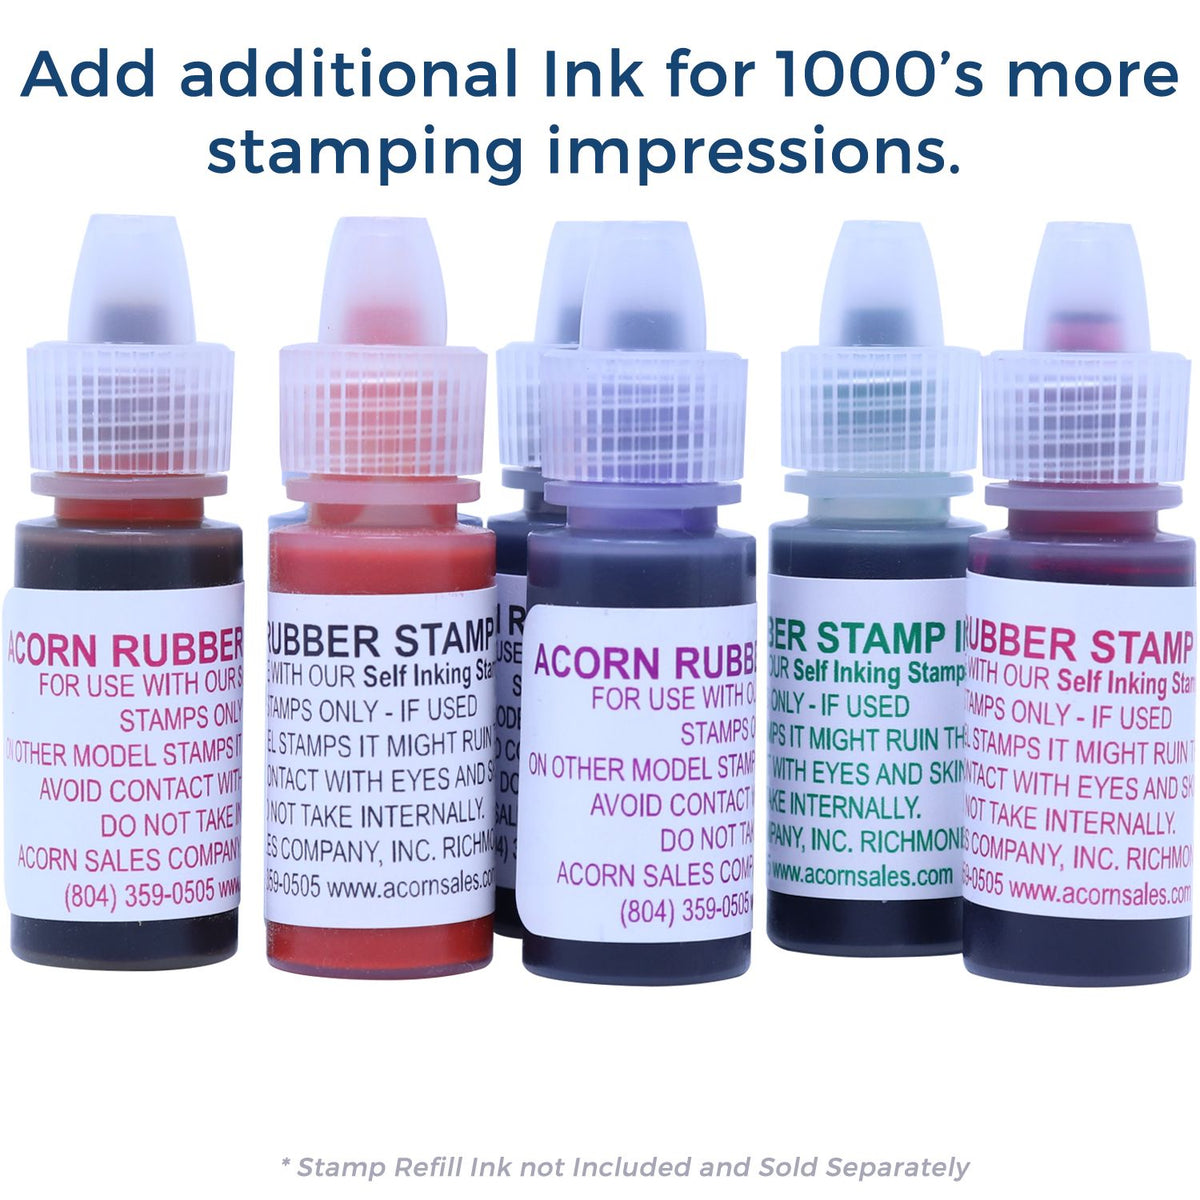 Refill Ink for Self-Inking Round Solid Star Stamp Available